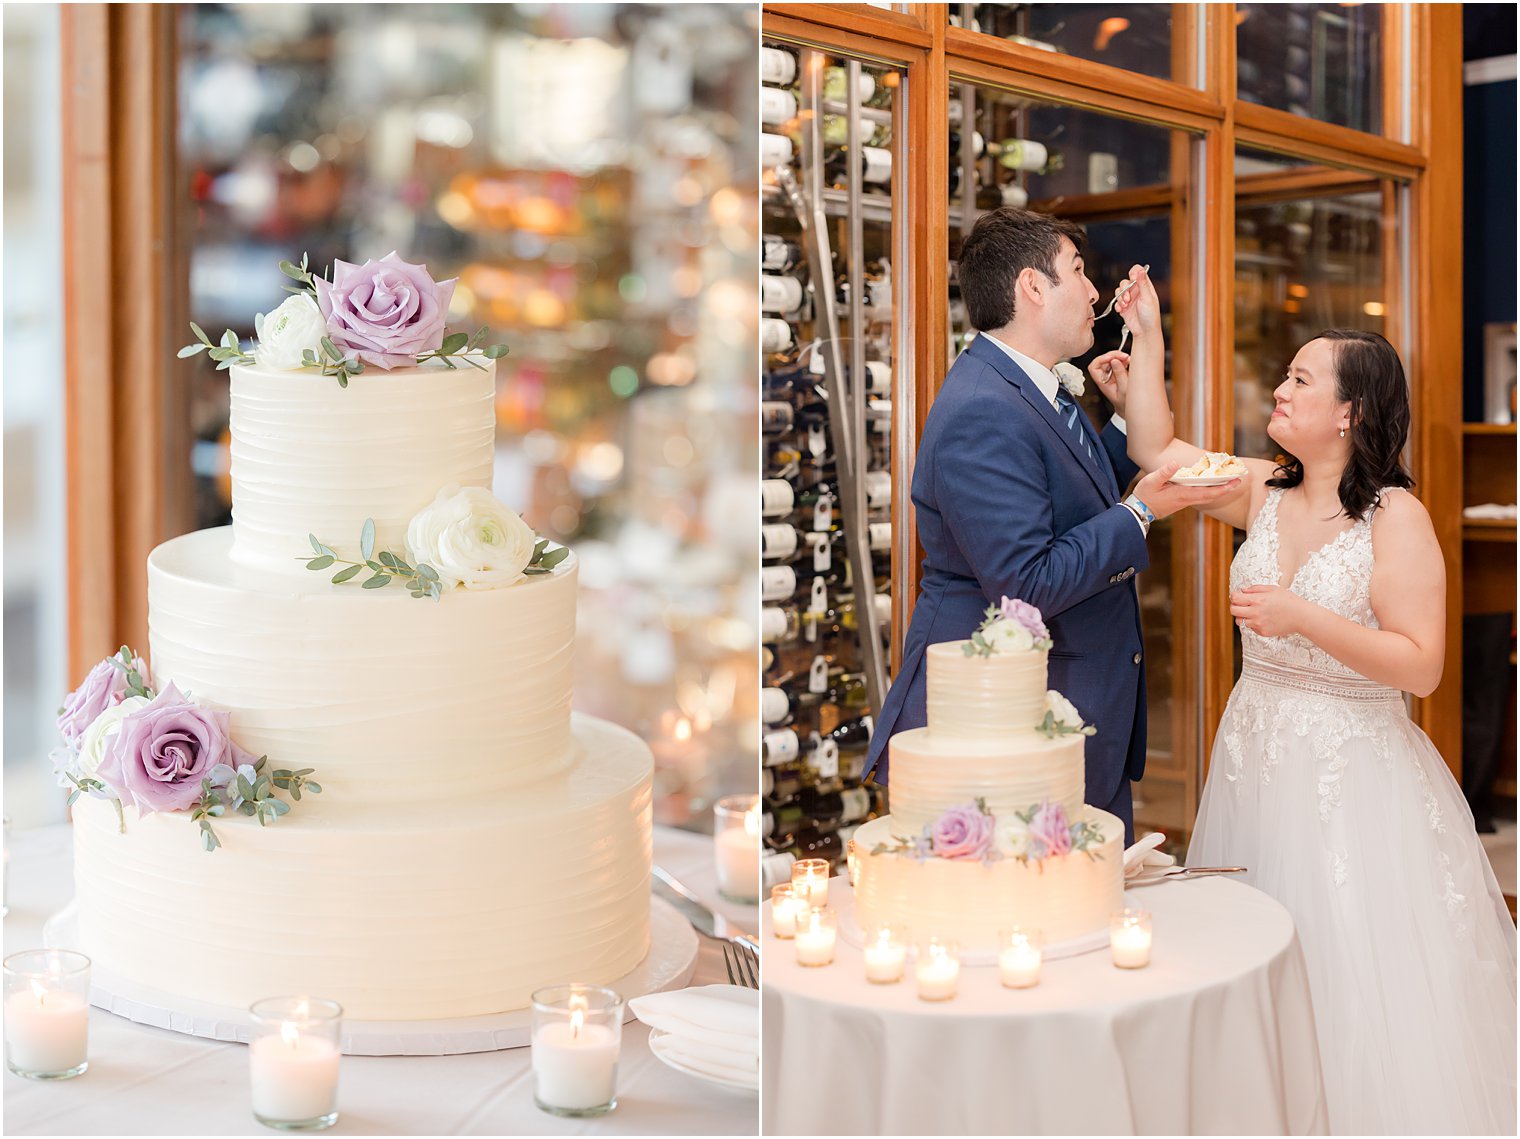 bride and groom cut wedding cake during reception at Icona Winddrift